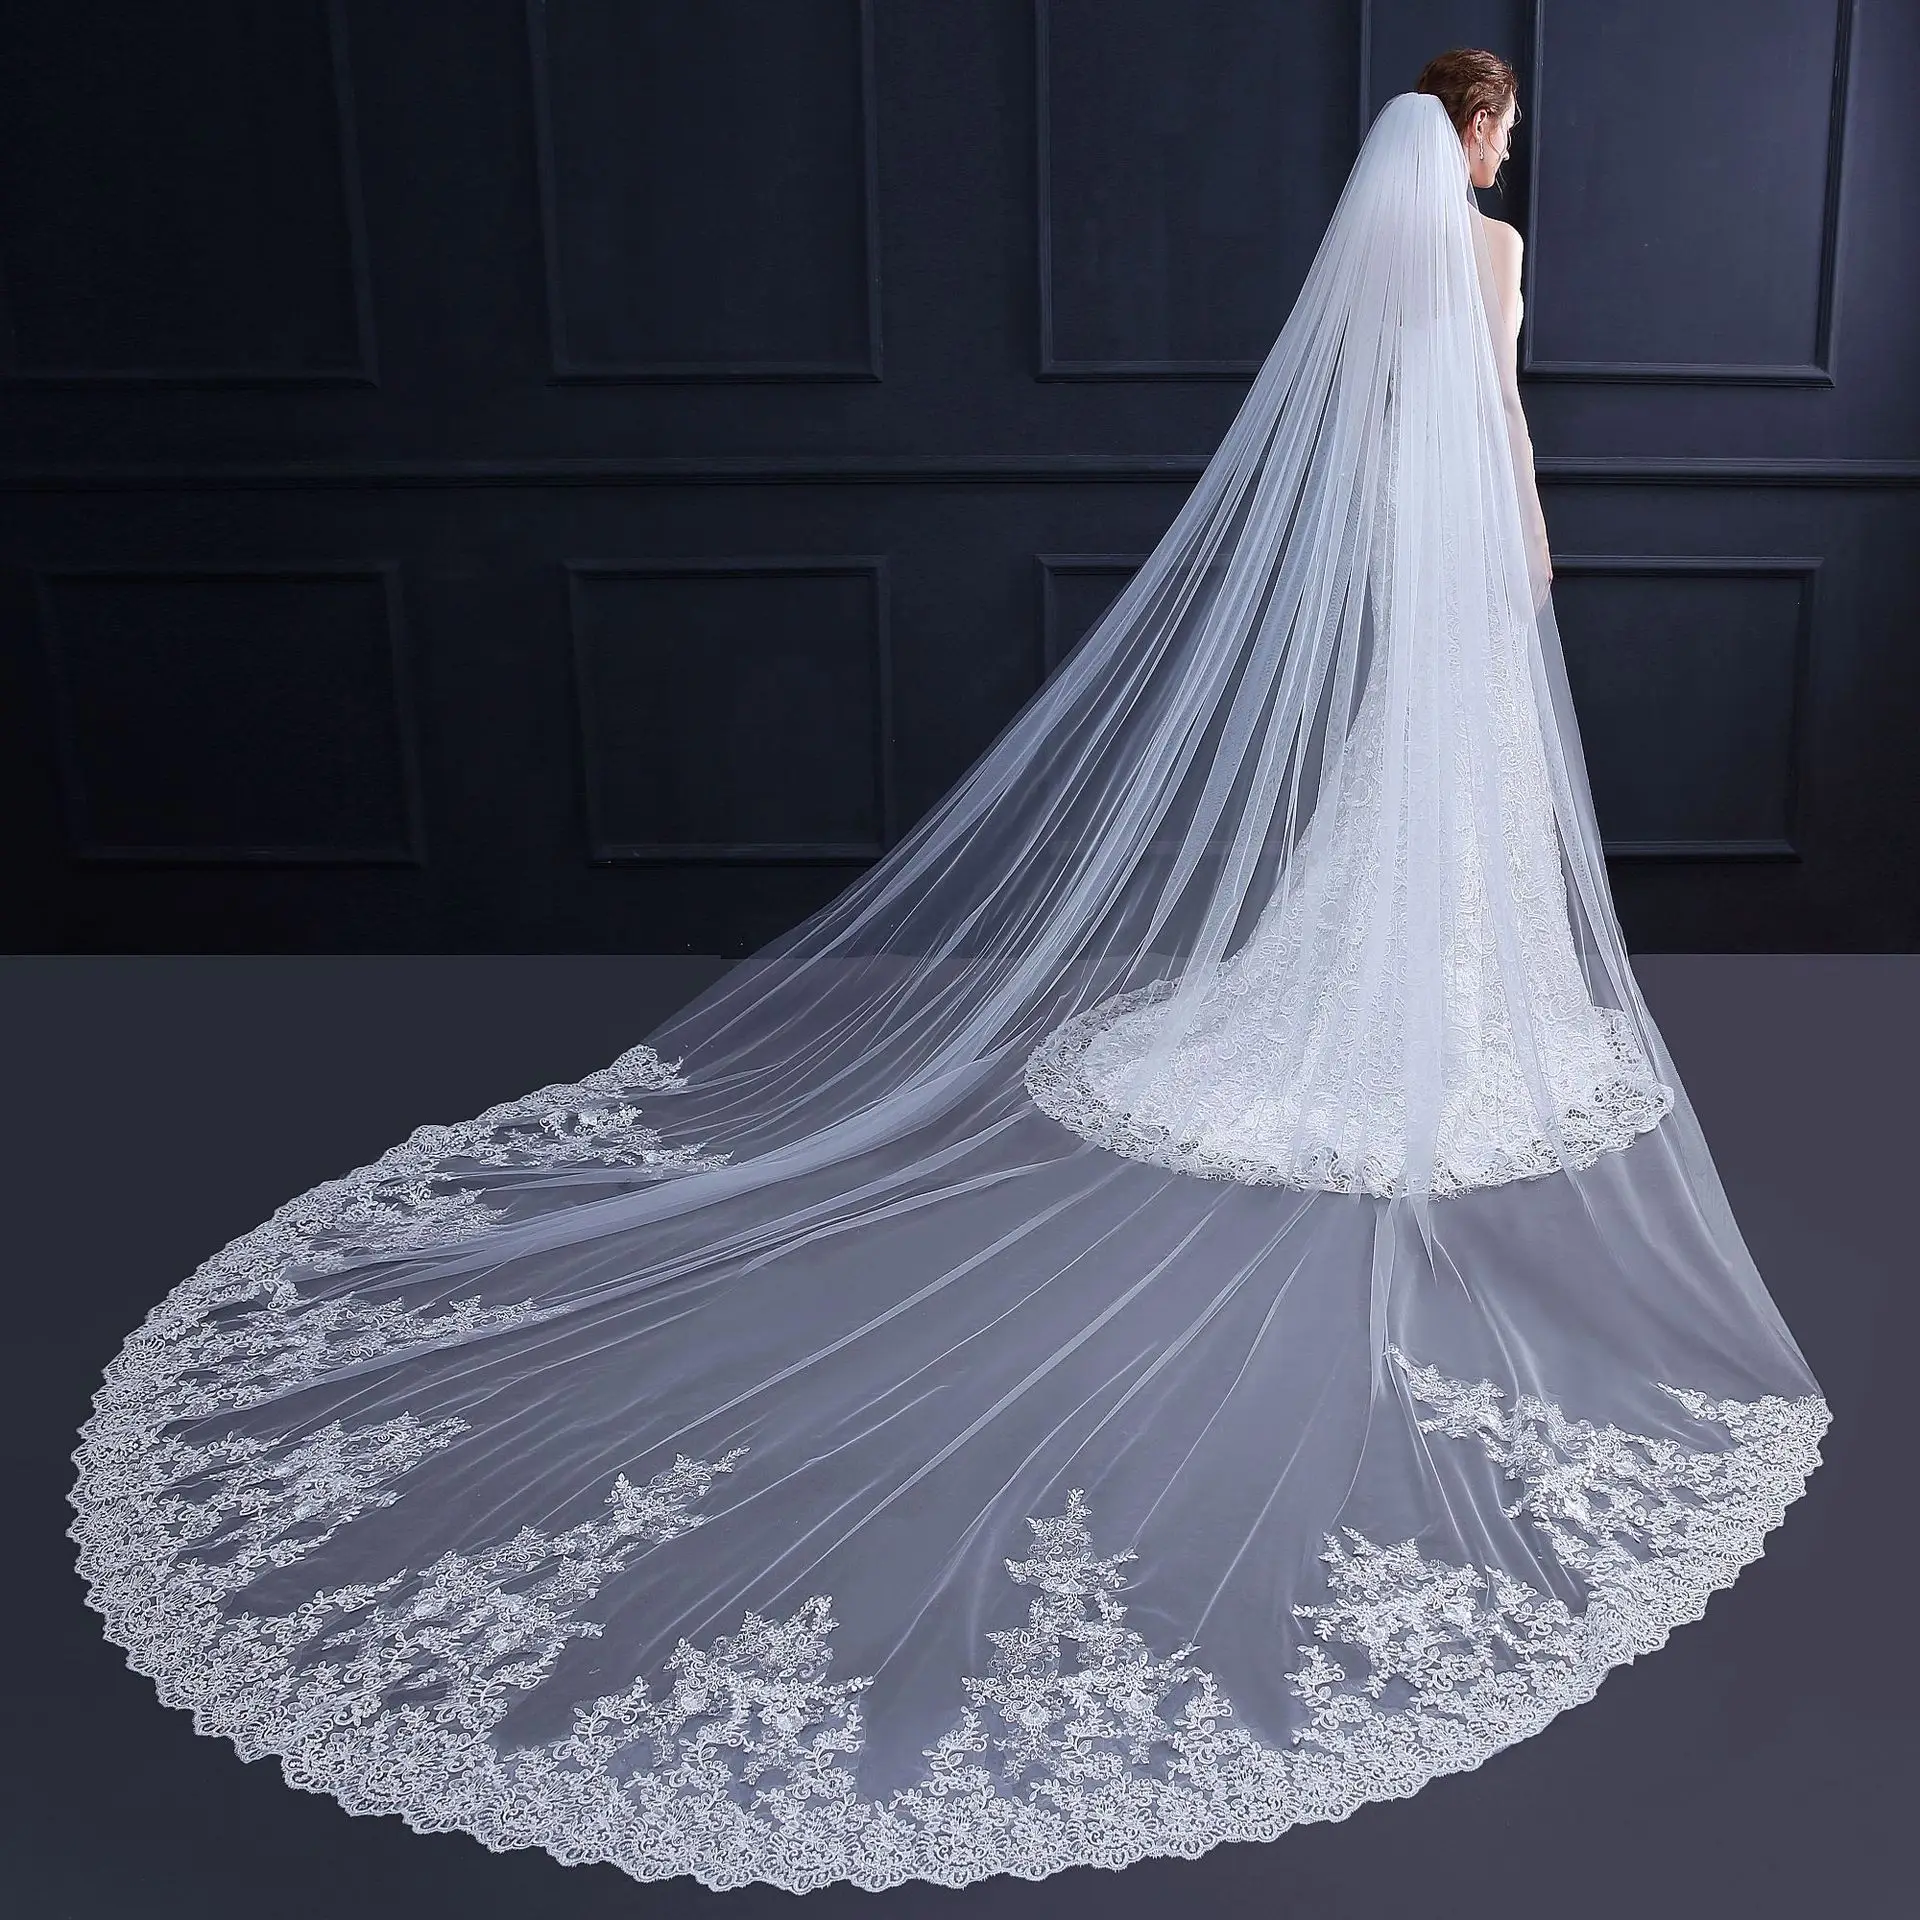 

veil one-layer White Ivory Cathedral Lace Edge Wedding Veil With Comb Long Bridal Veil Voile Mariage velos de novia largos